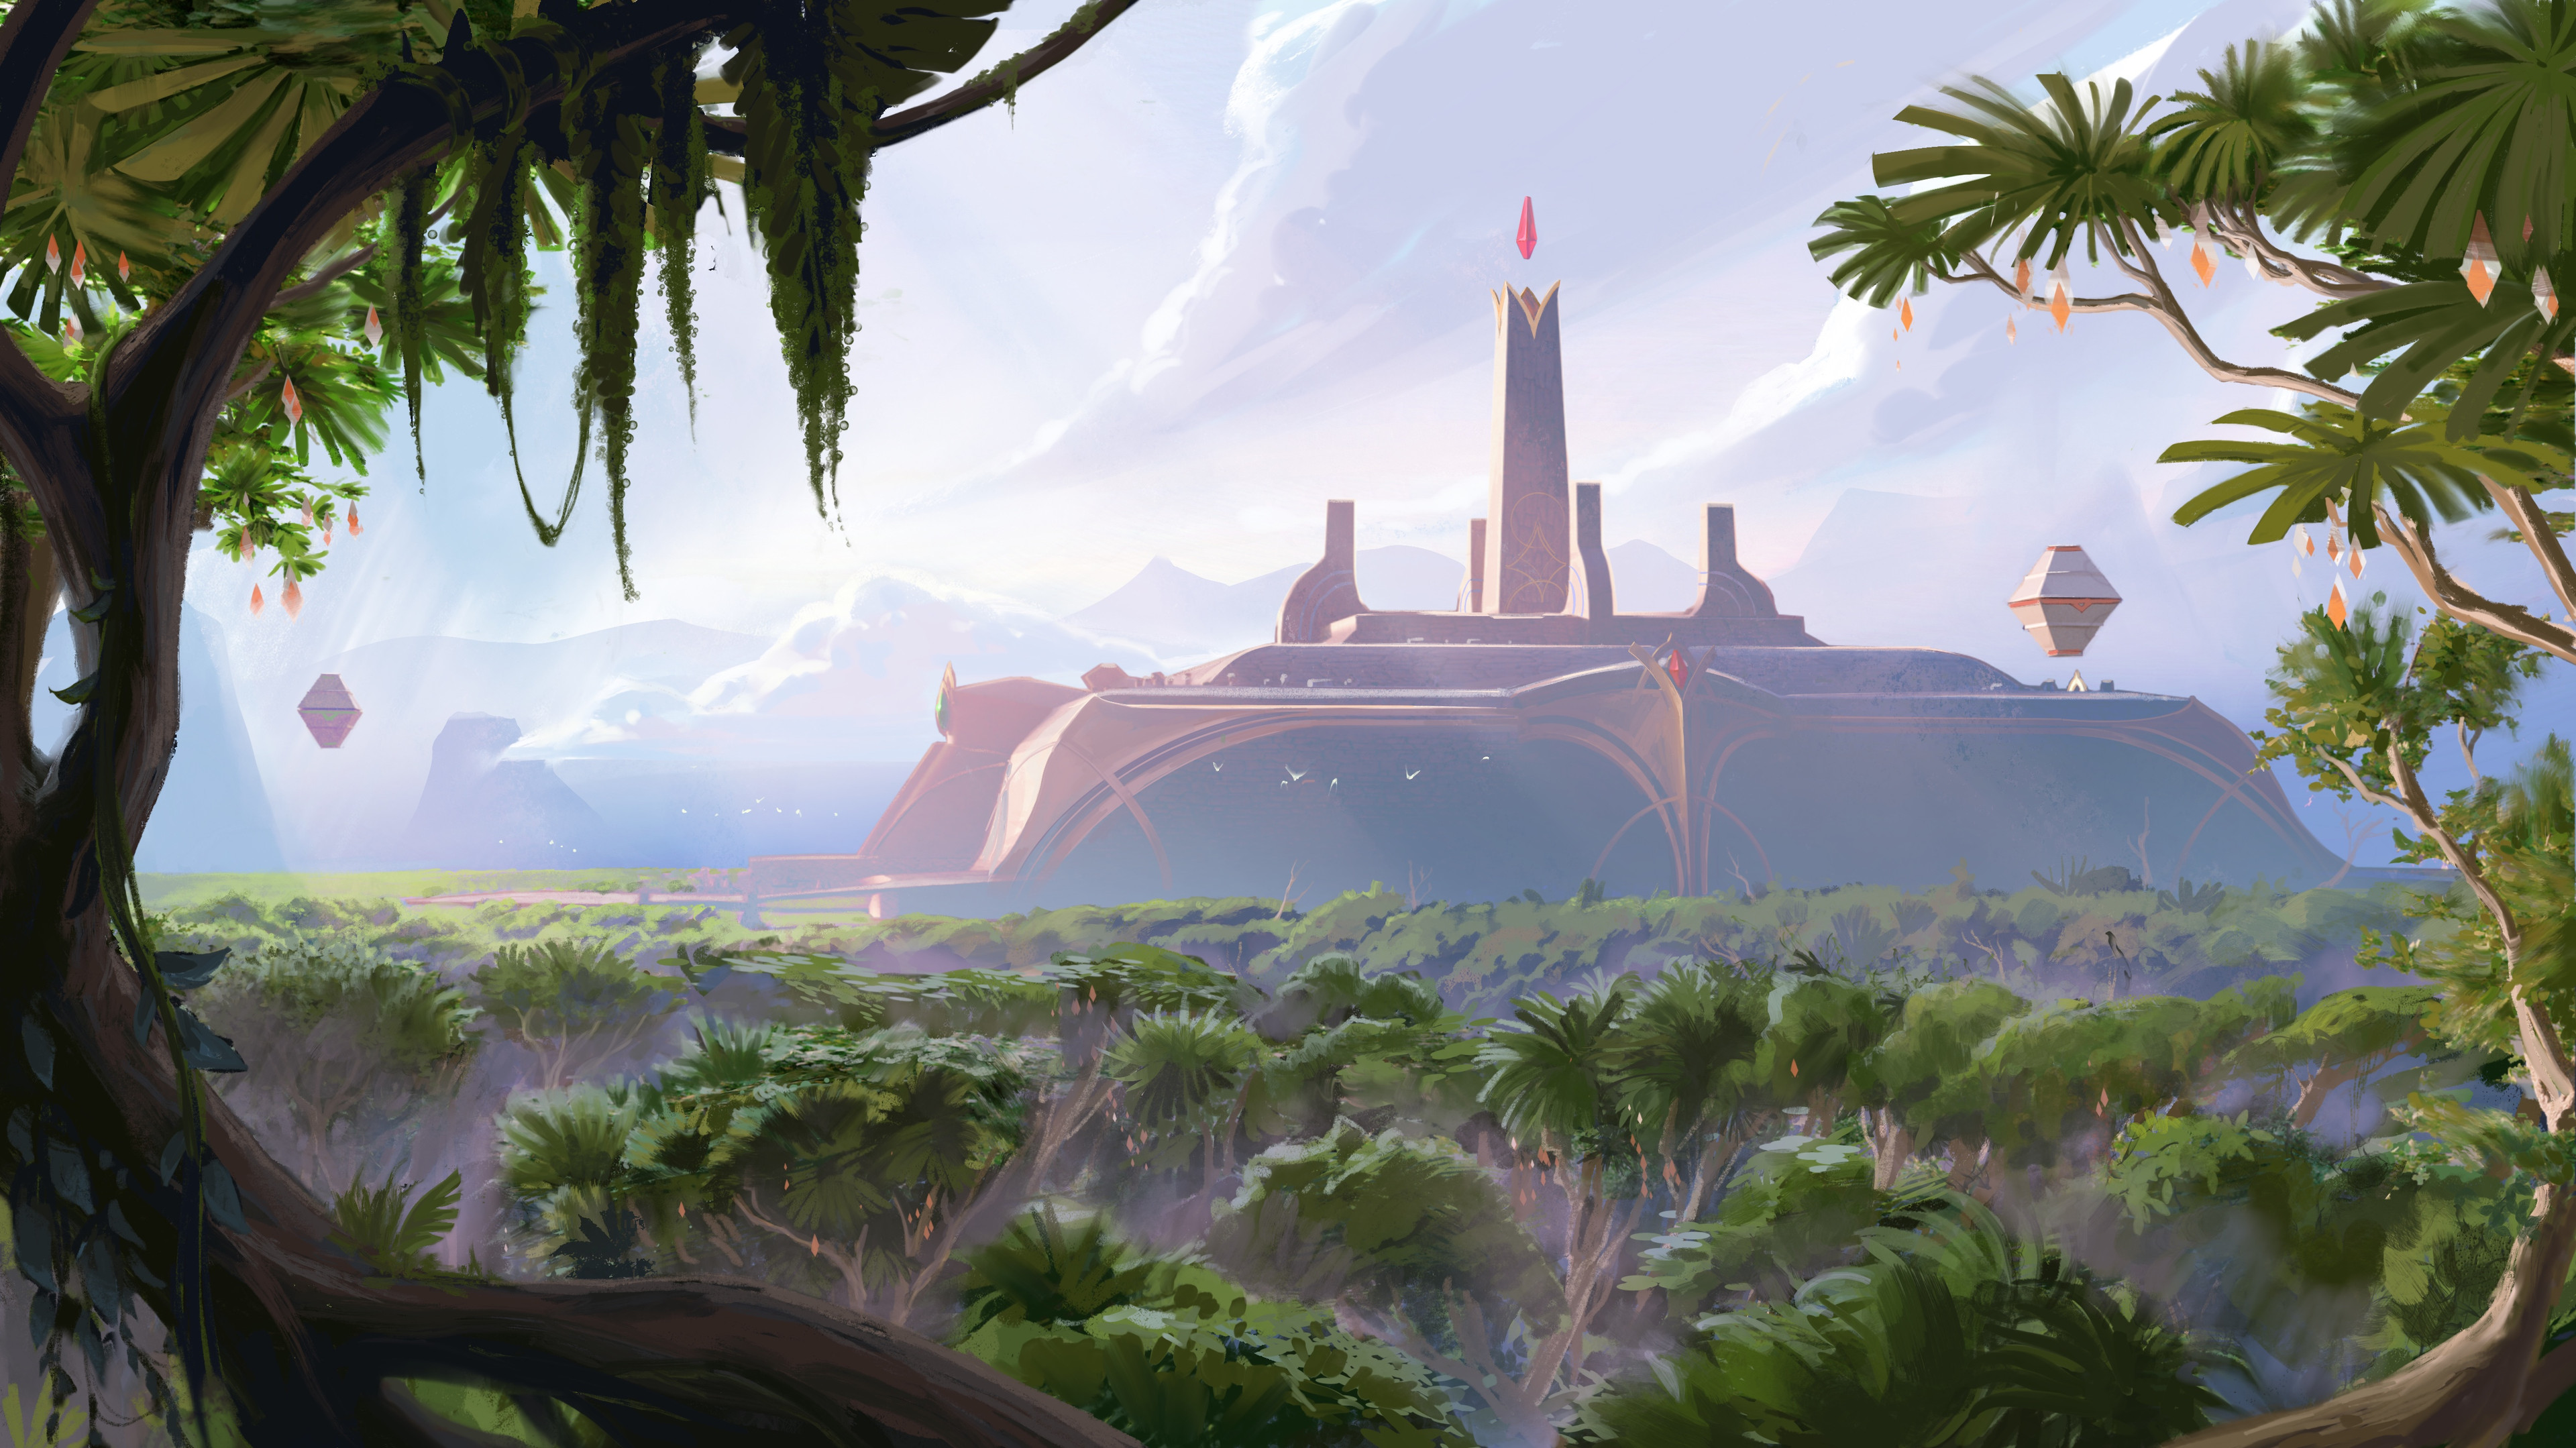 In truth, Ixtal is not the uninhabited wilderness many imagine. Far from prying eyes and greedy hands, the sprawling arcologies of Ixaocan remain safely hidden by the deepest rainforests. The cardinal arcology, seat of the ruling Yun Tal caste, has stood 